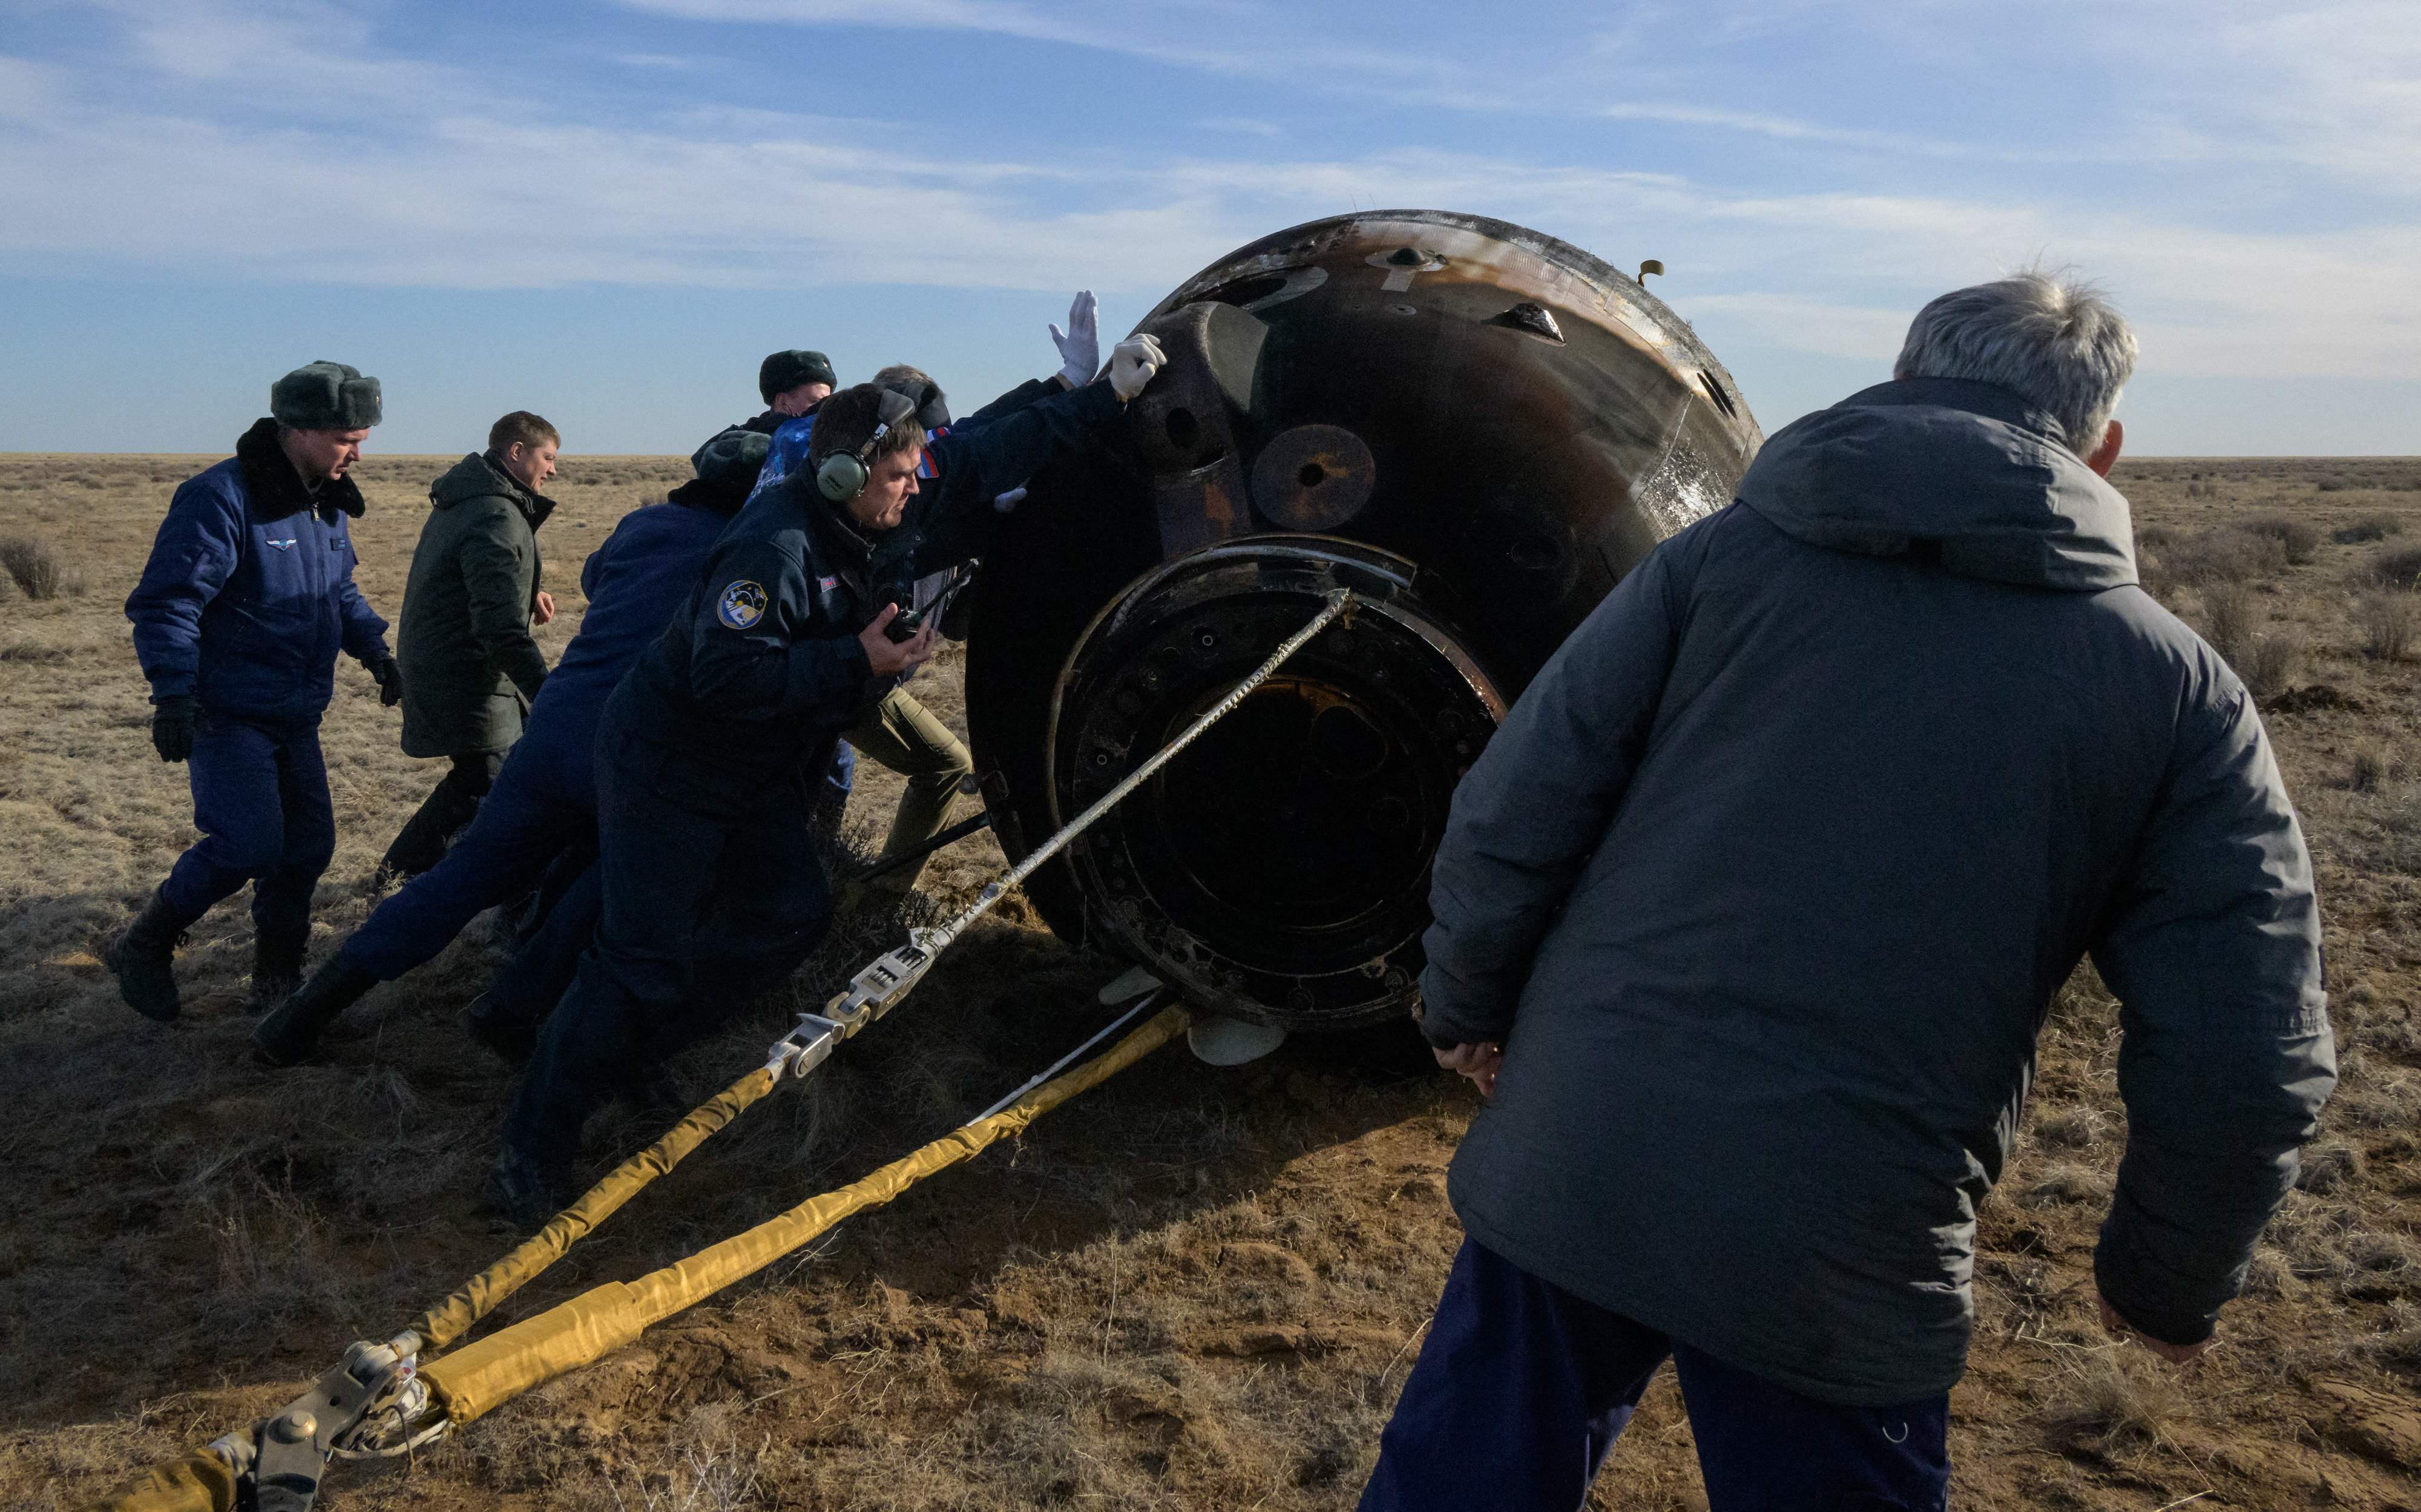 The moment the Russian Soyuz capsule touched down in Kazakhstan at 5.28pm local time on 30 March, 2022